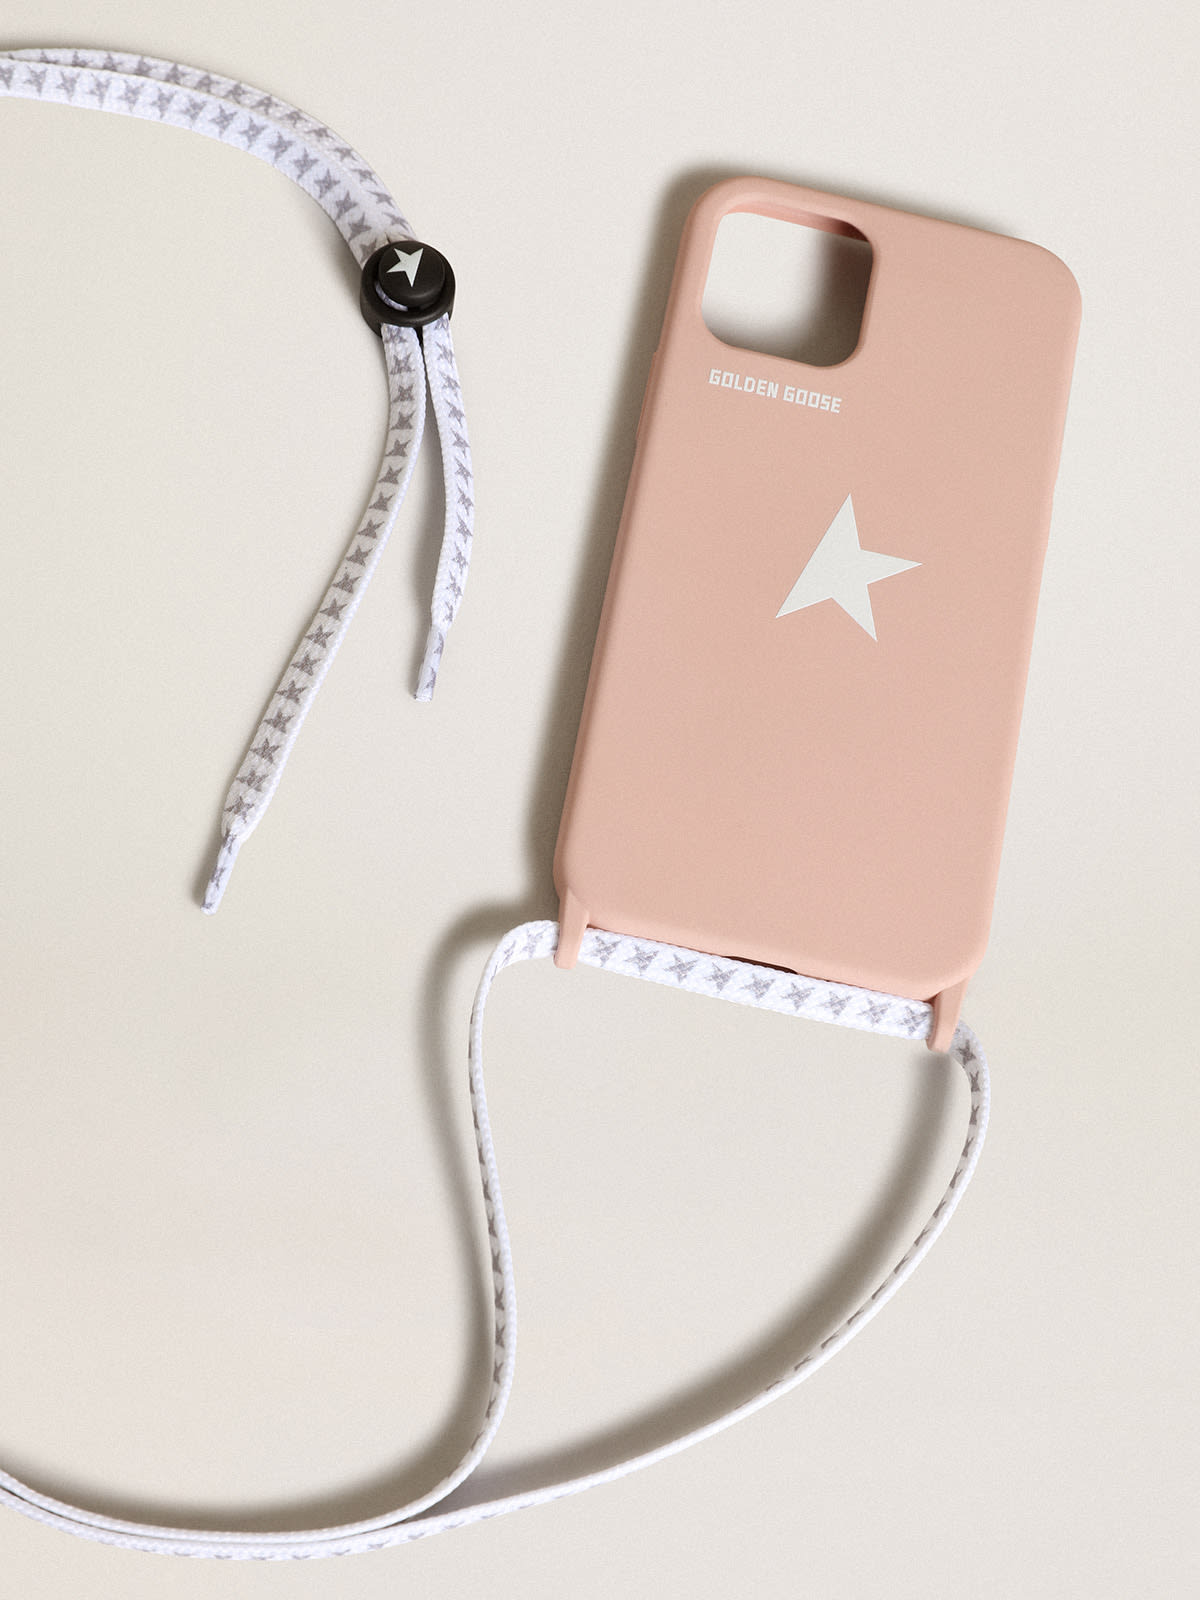 Golden Goose - Cover for iPhone 12 and 12 Pro Max light pink in 